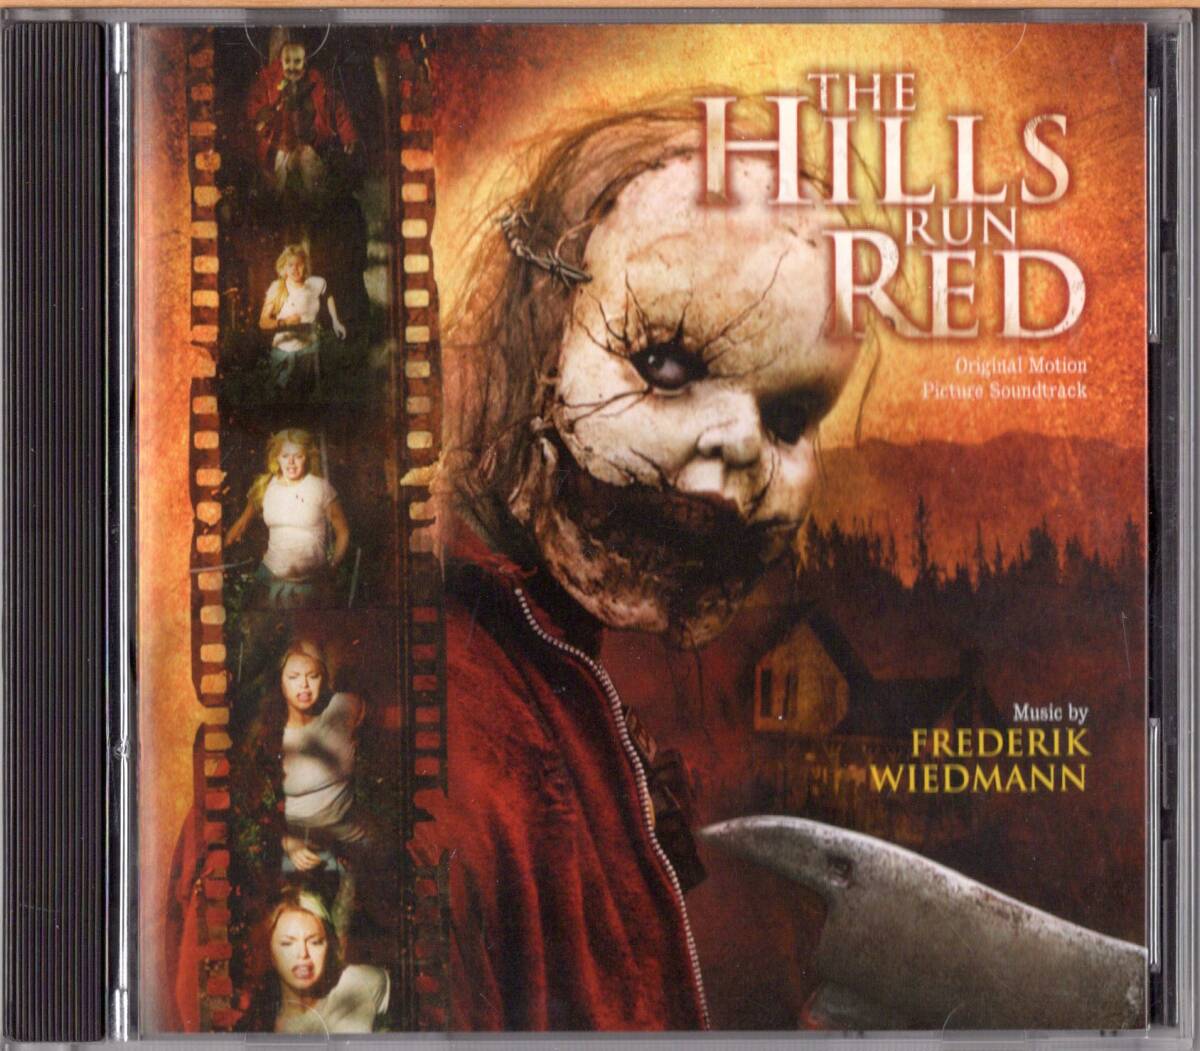 [ soundtrack CD] Frederick * we do man [ Hill z* Ran * red -. person. record -]*2009 year sale America record (VARESE)*FREDERIK WIEDMANN